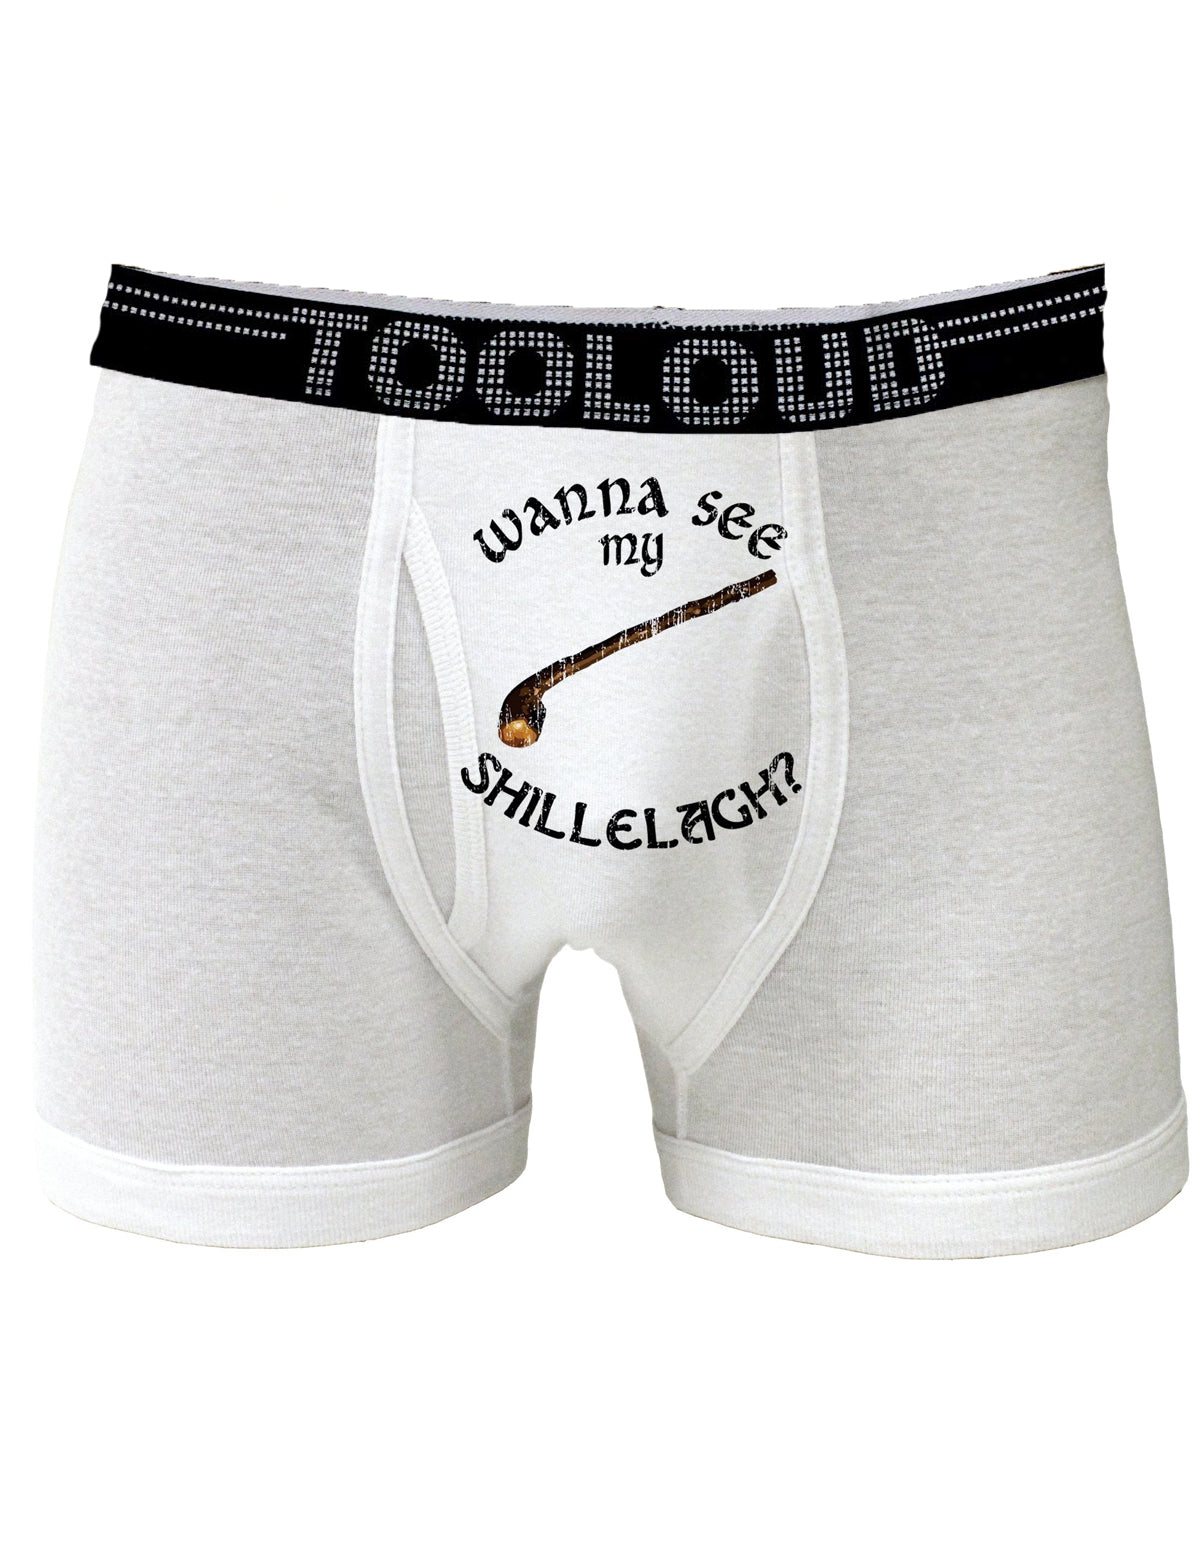 St Patricks Day Boxer Brief Underwear - Select Your Print